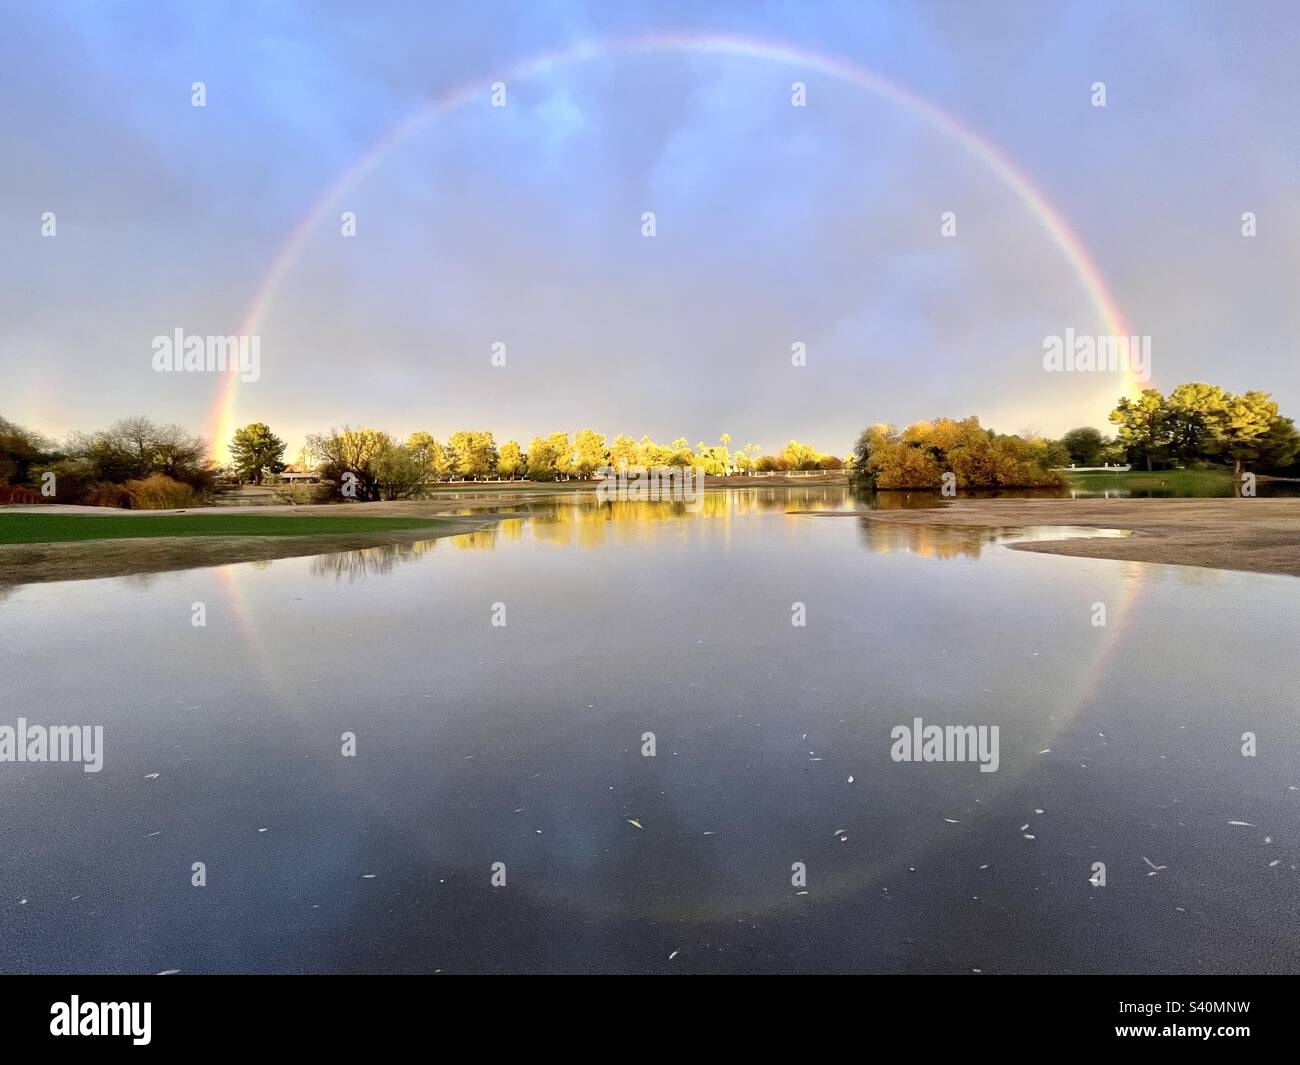 Head on, 360 degree rainbow, circling infinity perspective. Rainbow reflection in pond, tree reflections, stormy blue sky, golden sunset hues Stock Photo